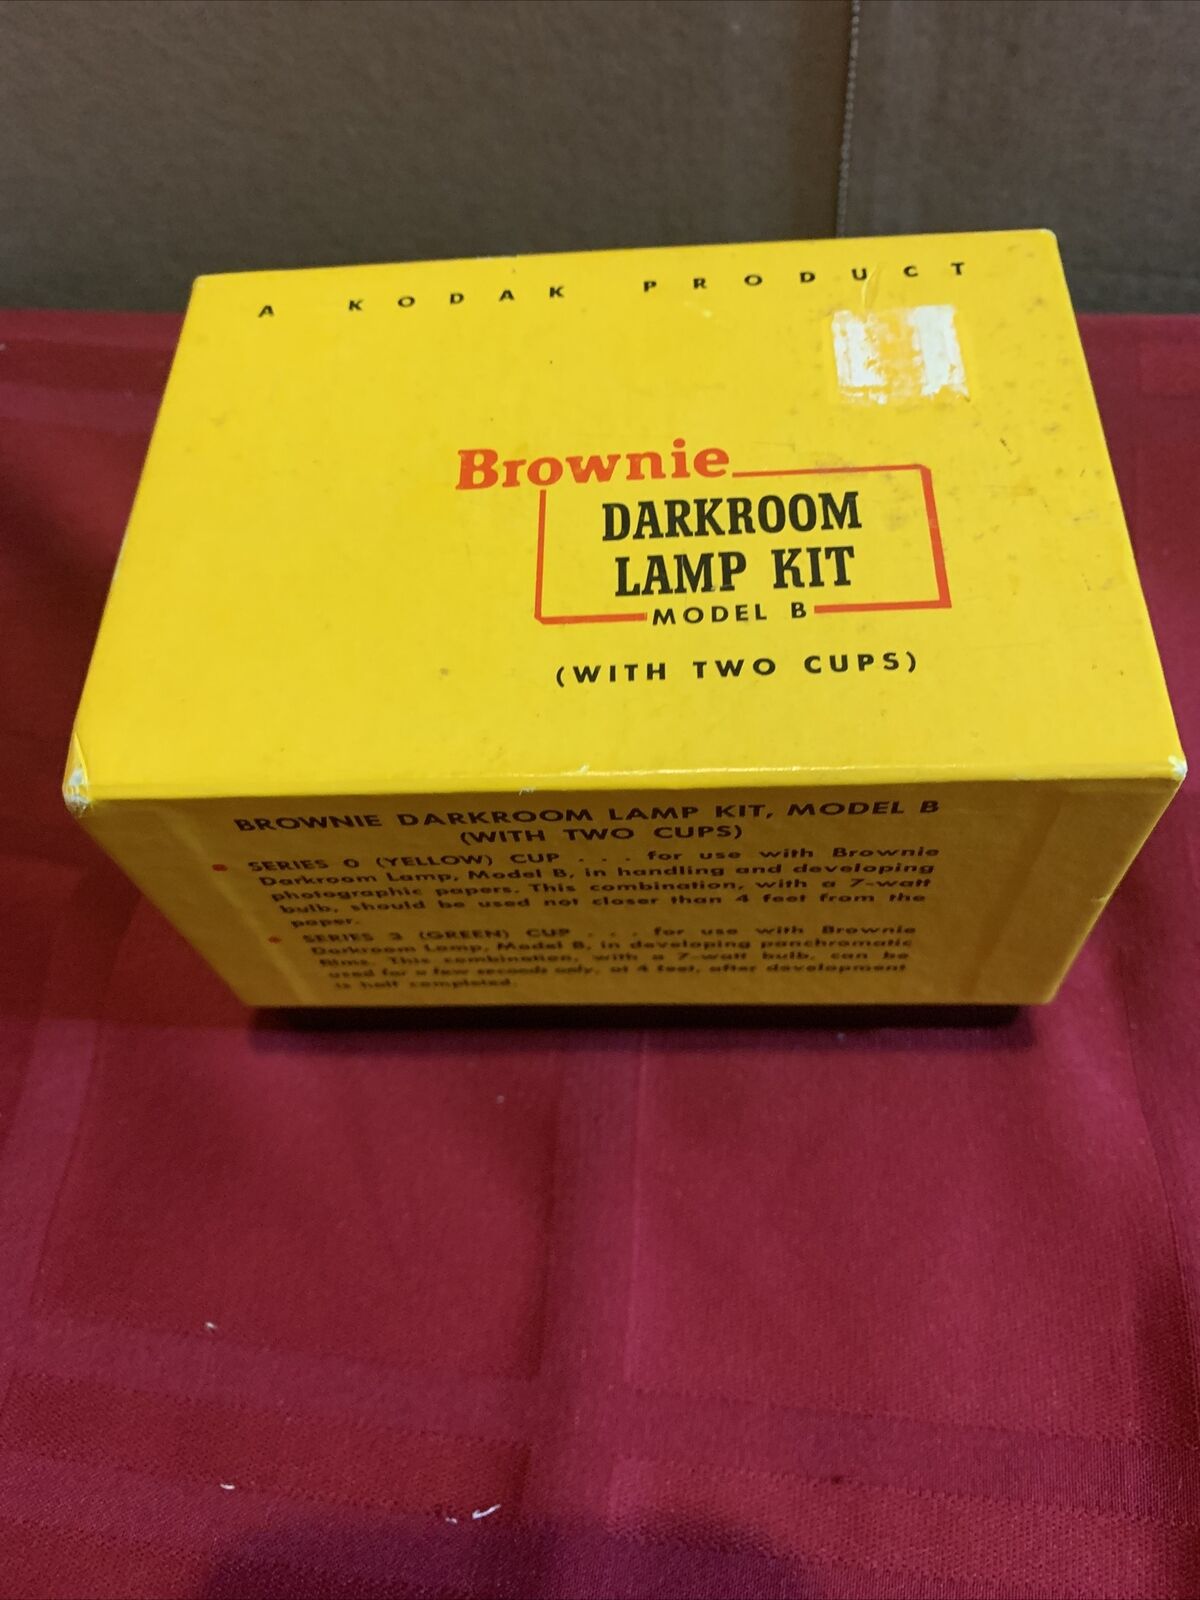 Kodak Brownie Dark Room Lamp Kit, Model B, With Two Cups Yellow And Green In Box